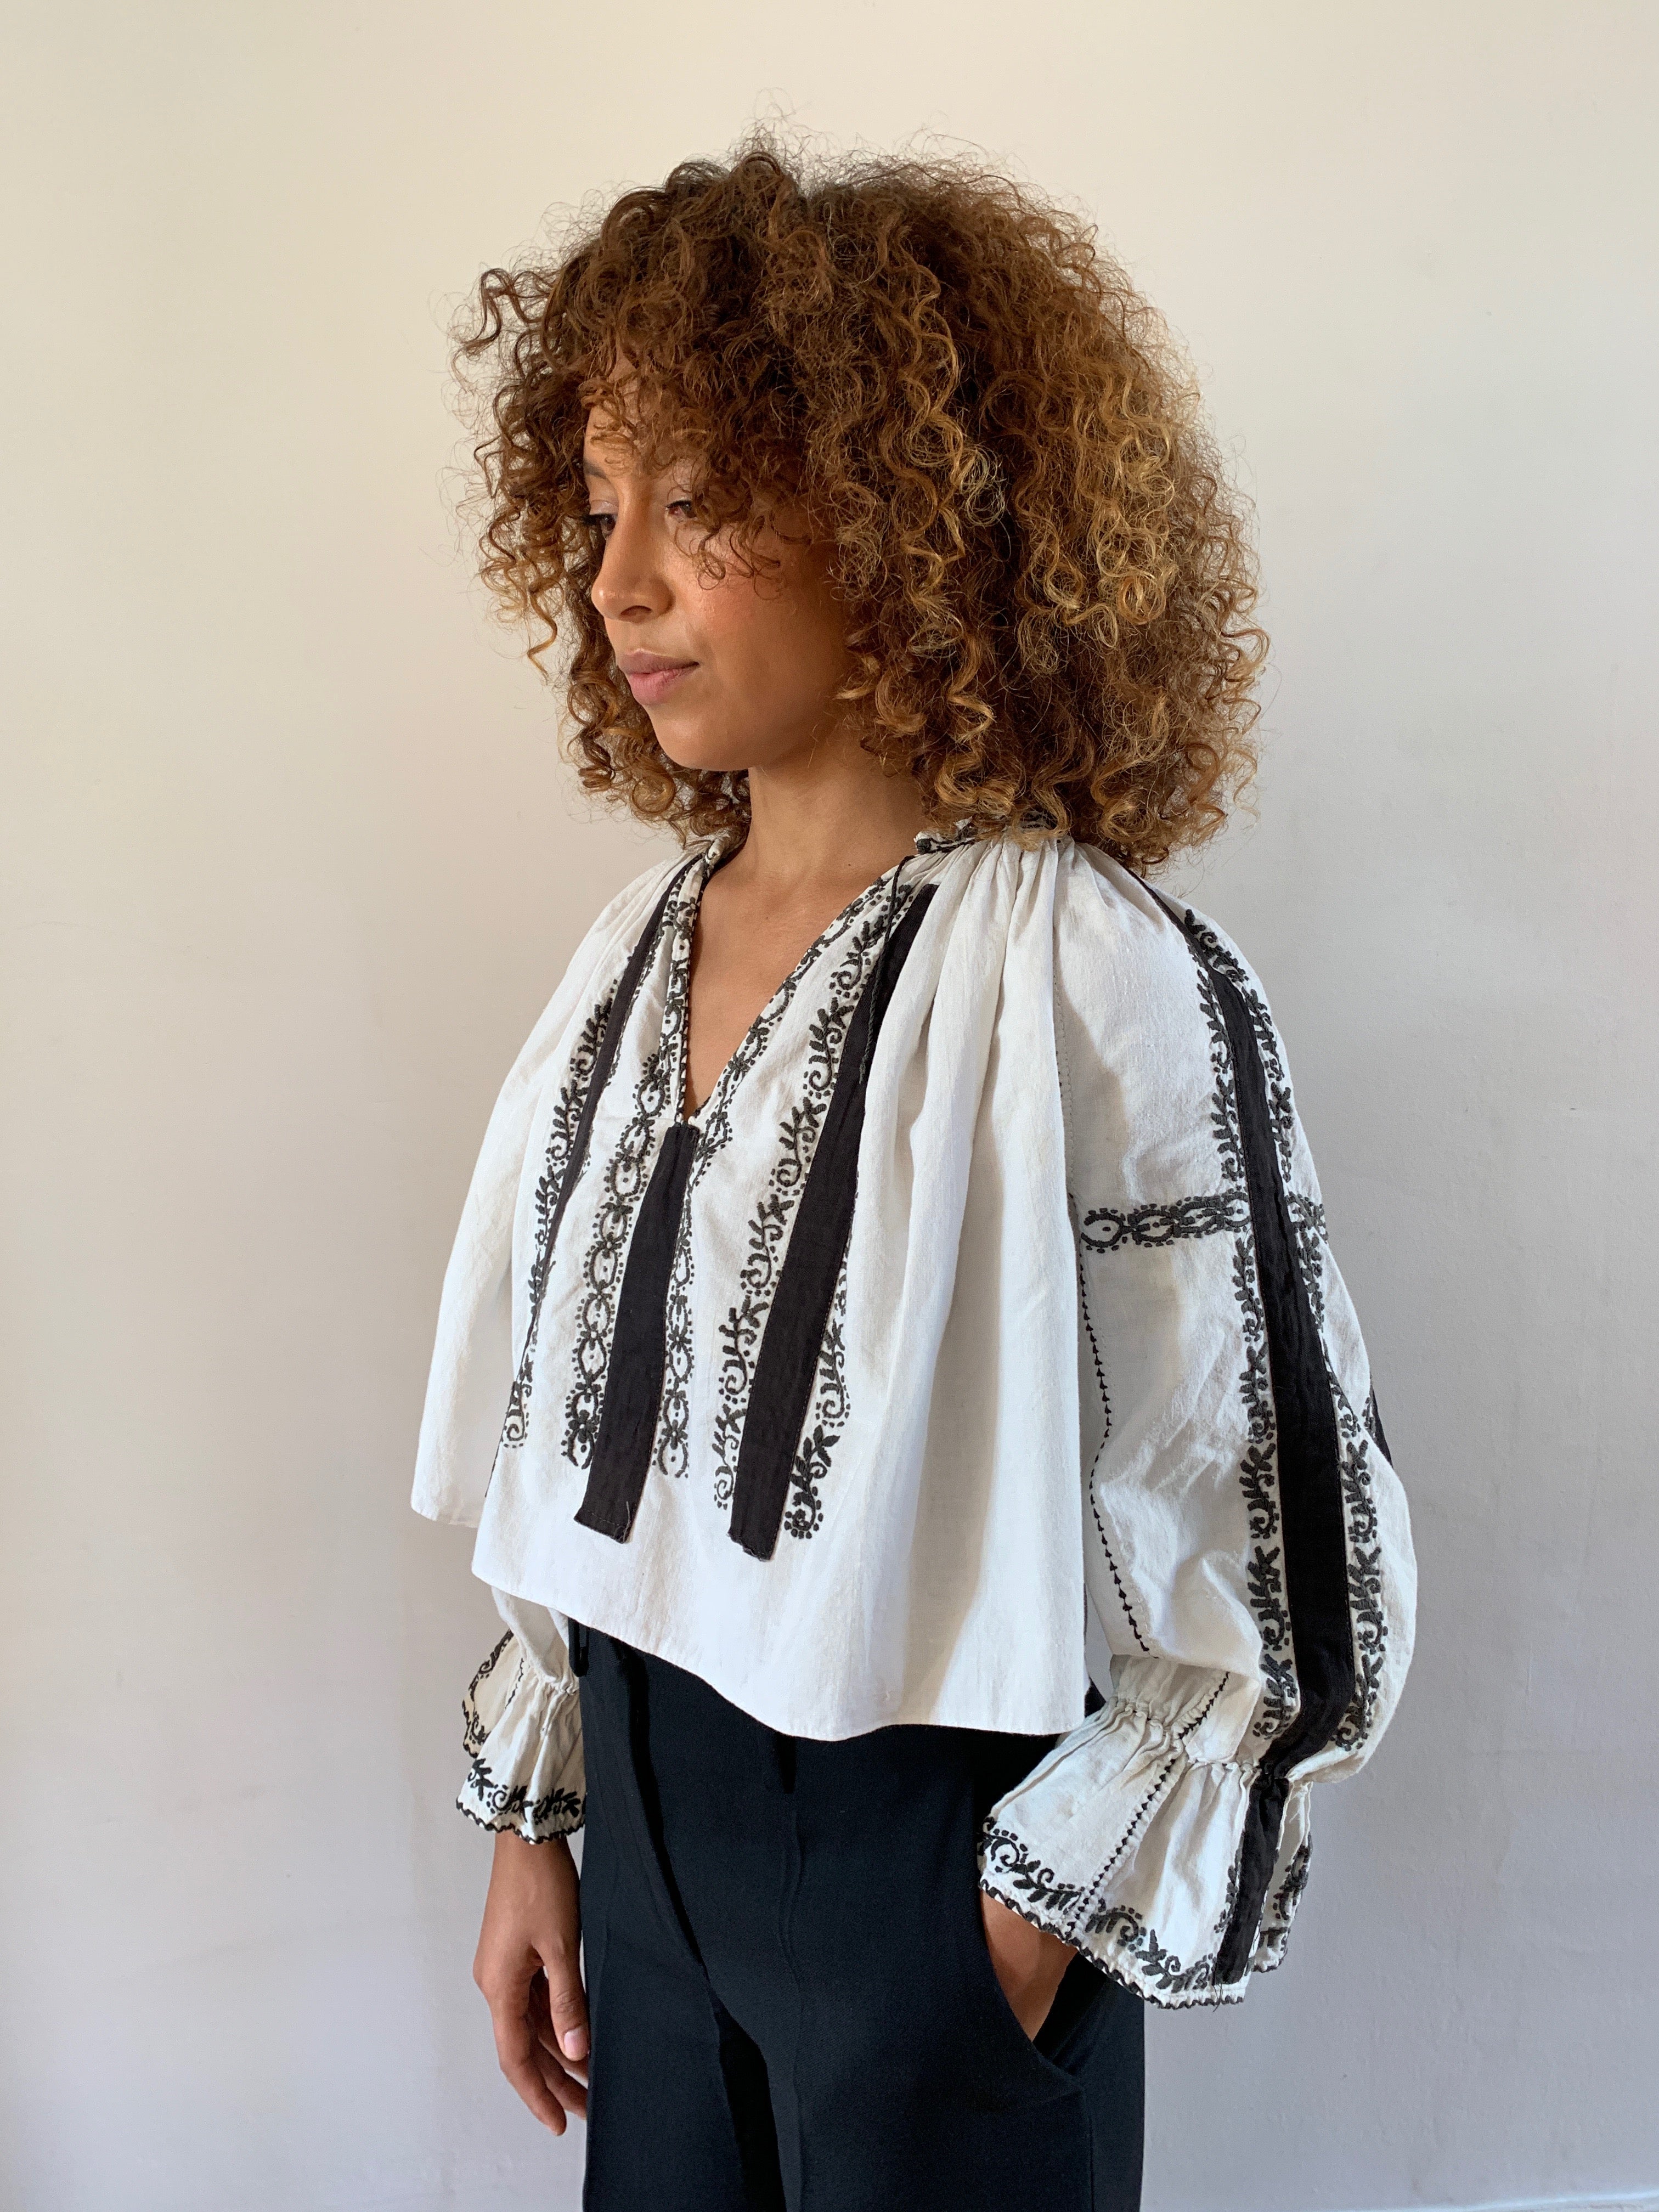 Vintage 1940's  hand-embroidered Romanian blouse